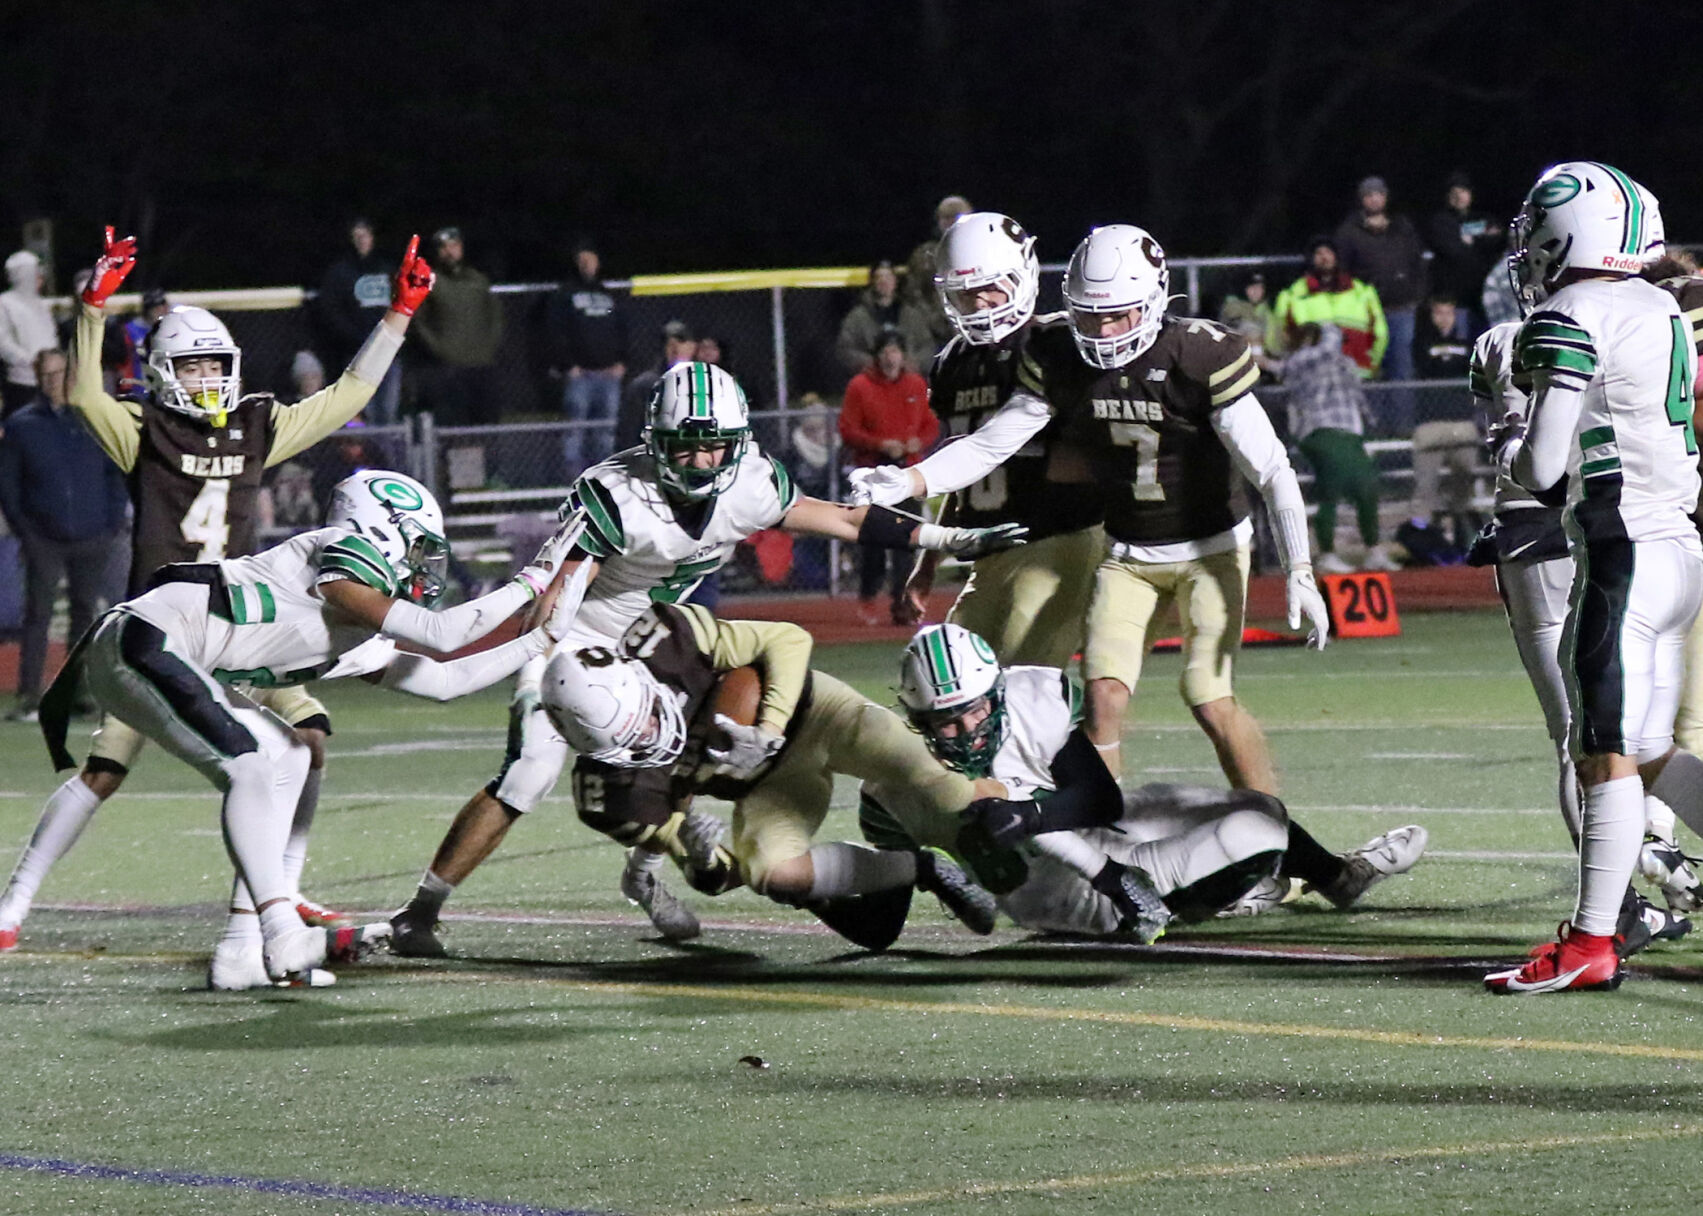 Griswold-Wheeler edges out Stonington in thrilling 33-30 victory